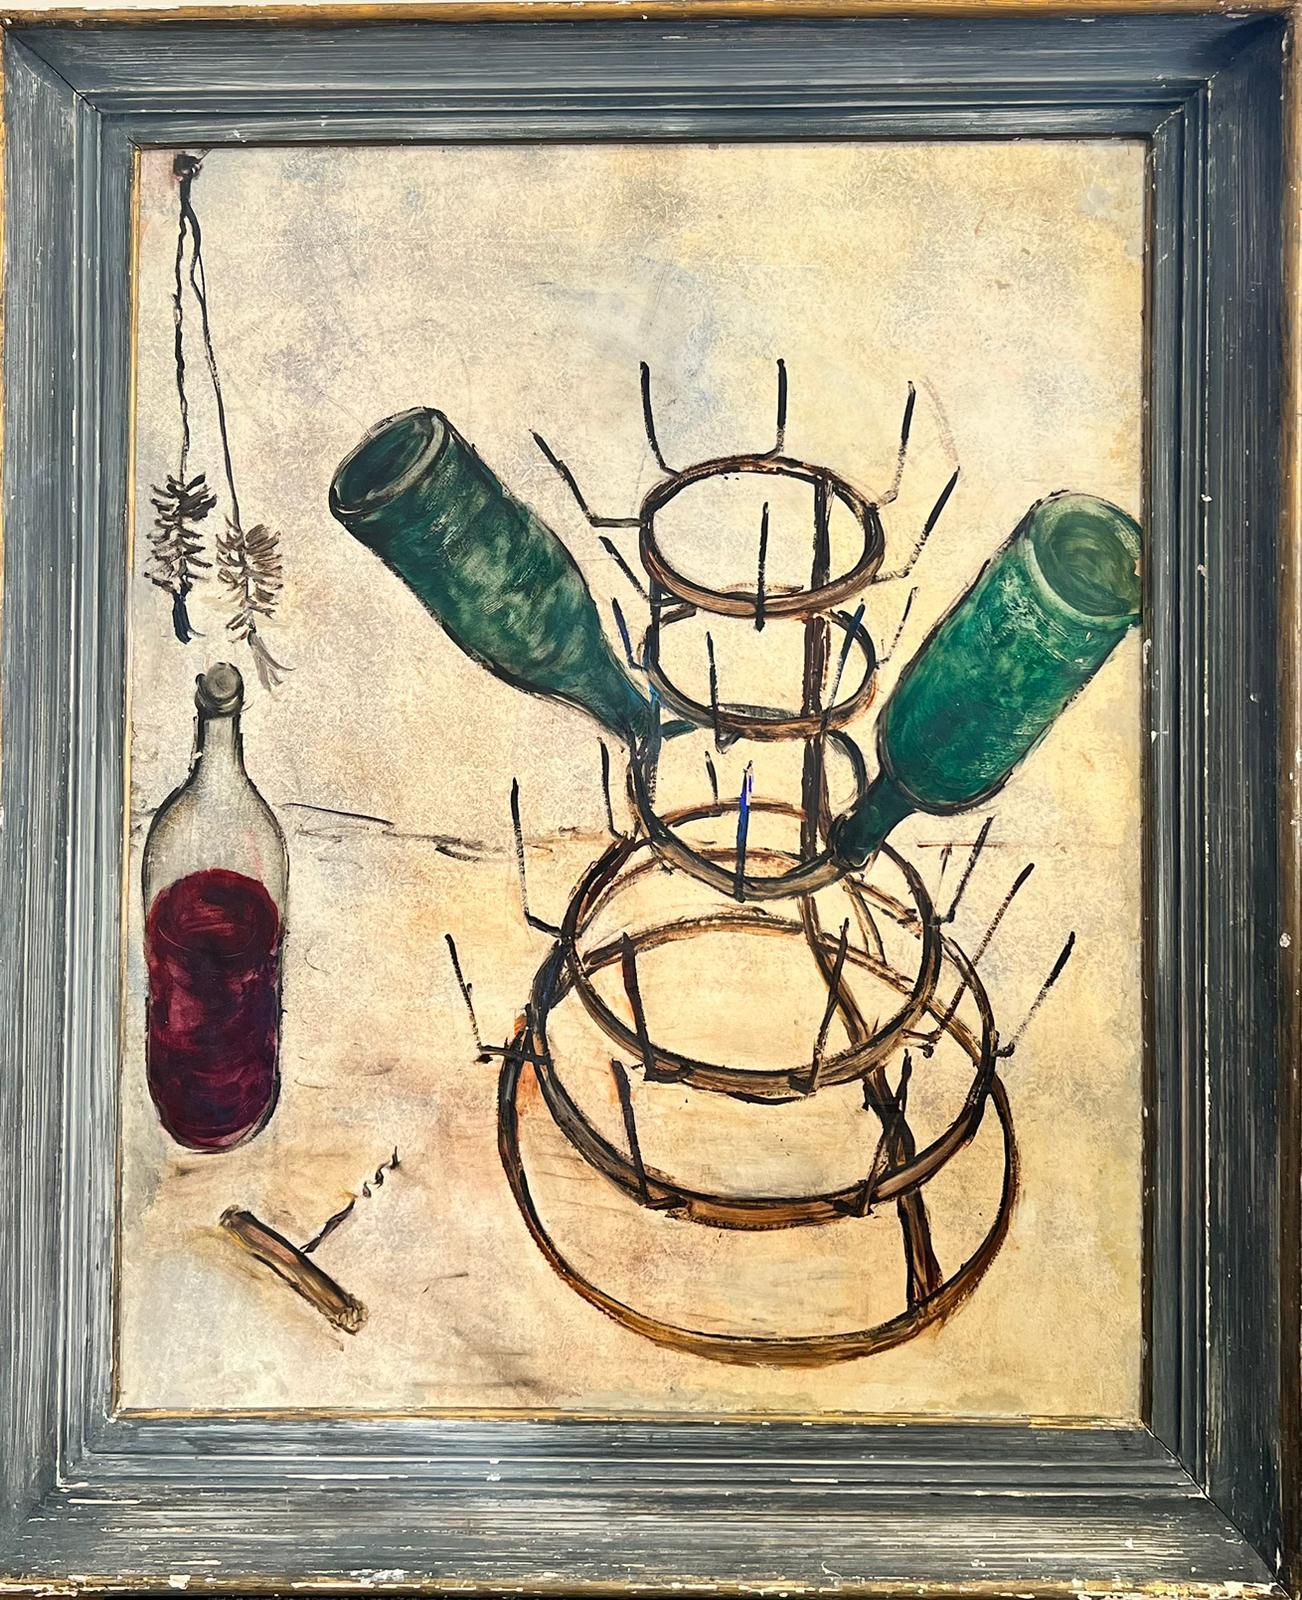 Circle of Bernard Buffet Interior Painting - 1960’s French Expressionist Oil Wine Bottles Drying on Metal Rack